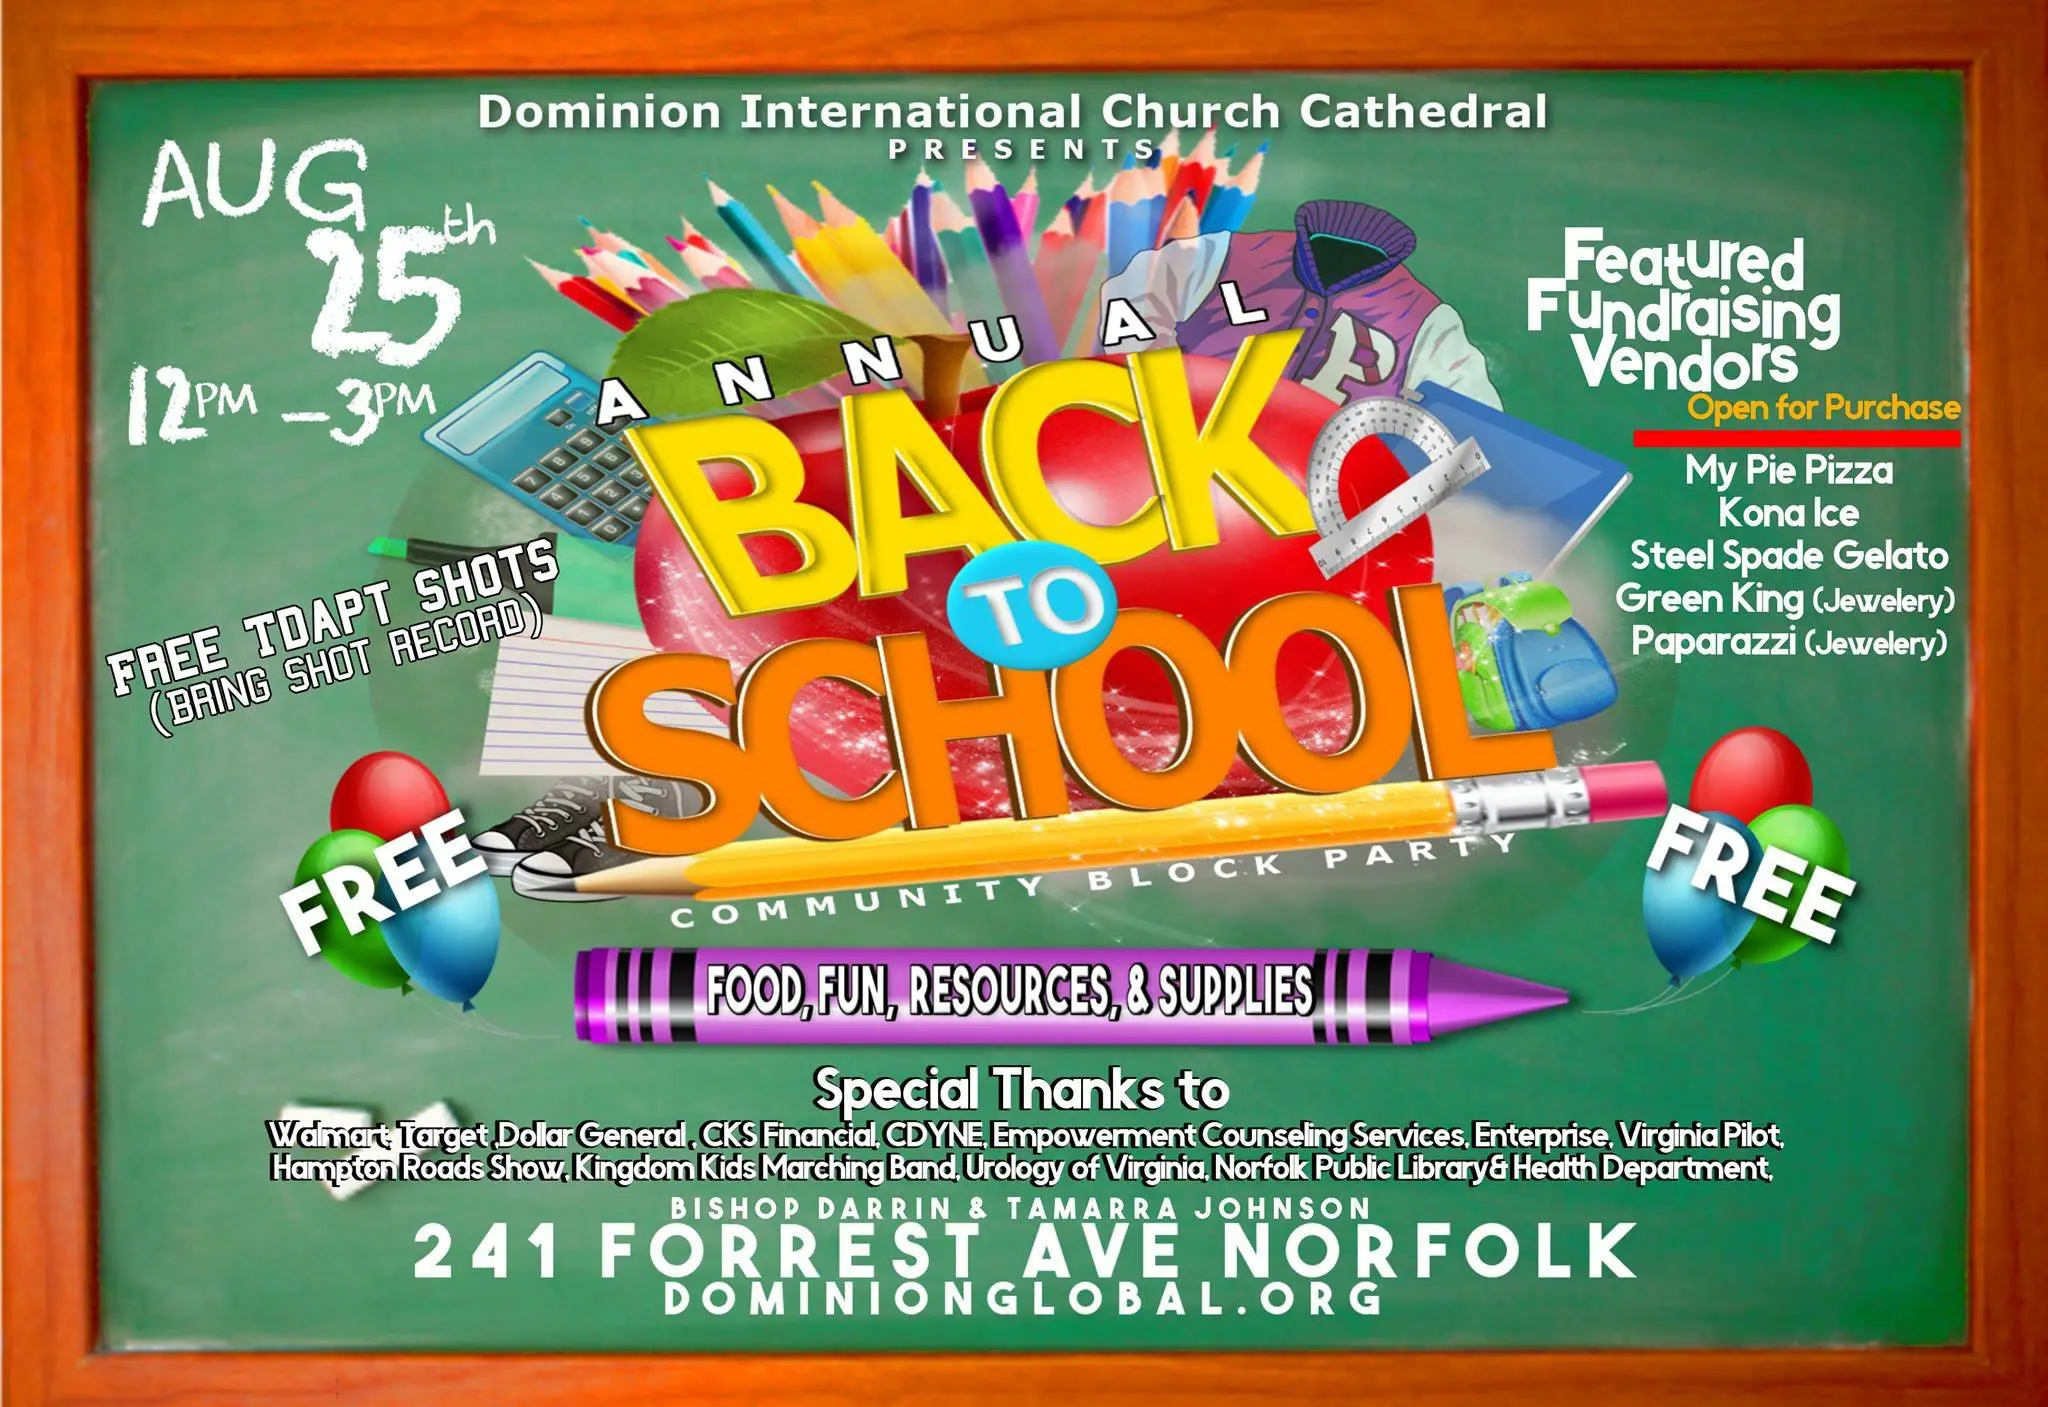 Annual Back to School Block Party by Dominion International Church Cathedral